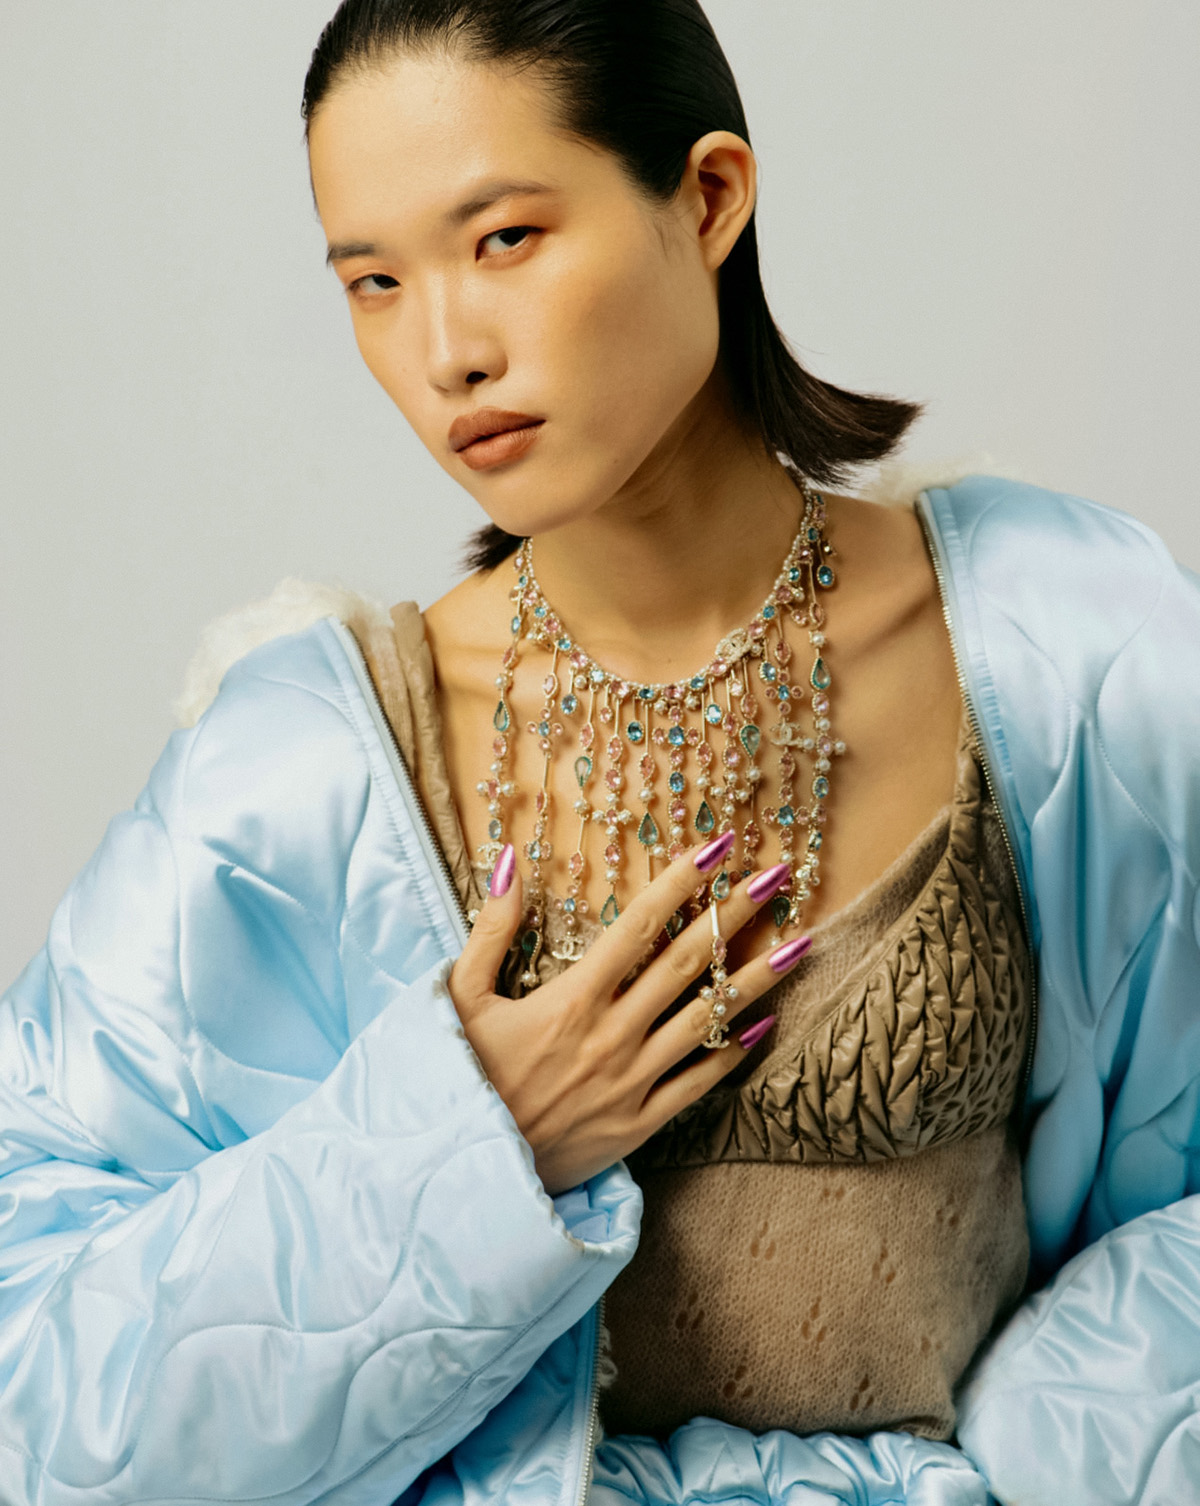 Wendy Huang and Stephanie Johnson by Luna Conte for Marie Claire France December 2021